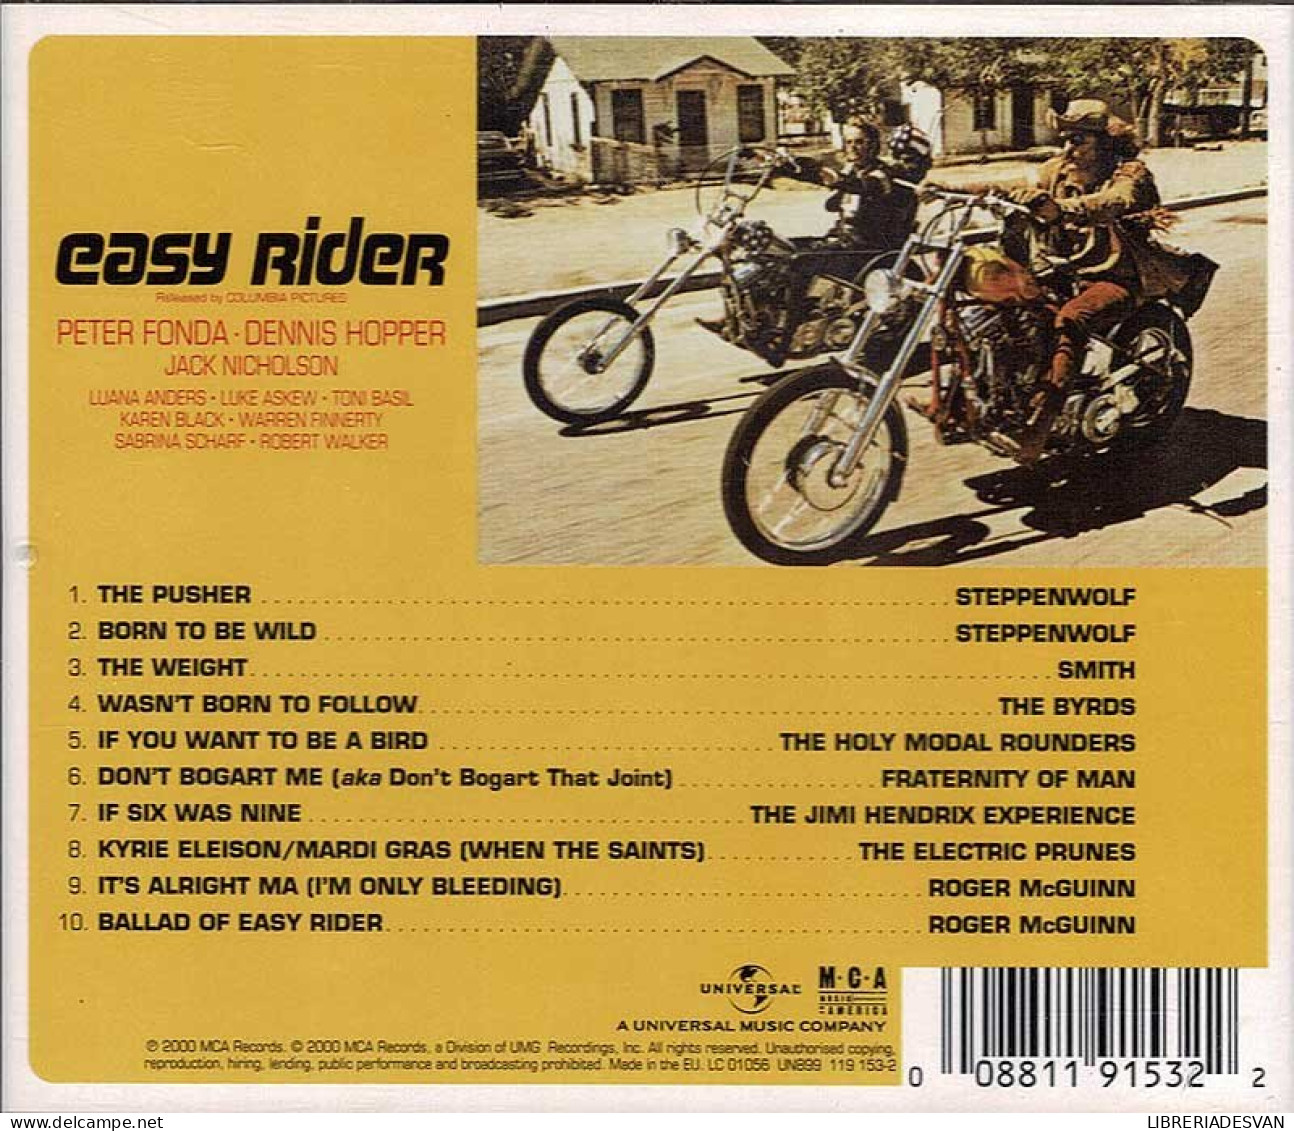 Easy Rider (Music From The Soundtrack). CD - Soundtracks, Film Music